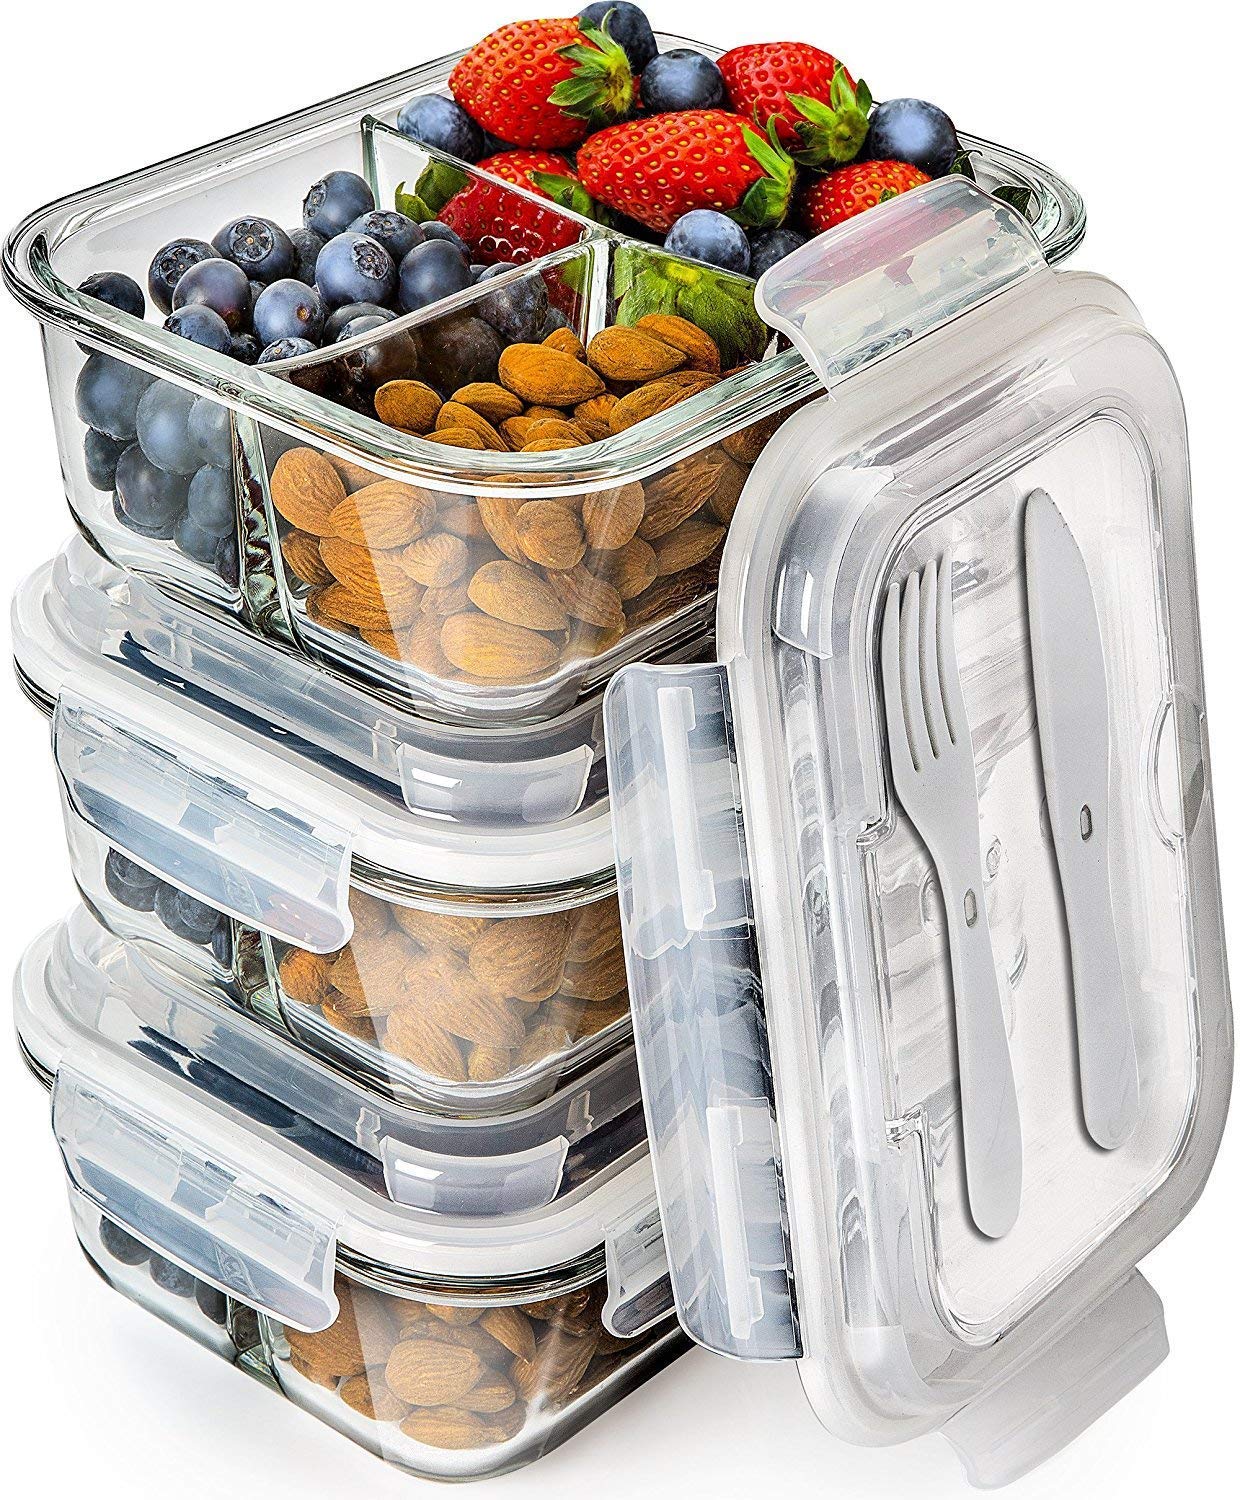 https://www.dontwasteyourmoney.com/wp-content/uploads/2019/11/prep-naturals-glass-meal-prep-containers-3-compartment-bento-lunchbox.jpg